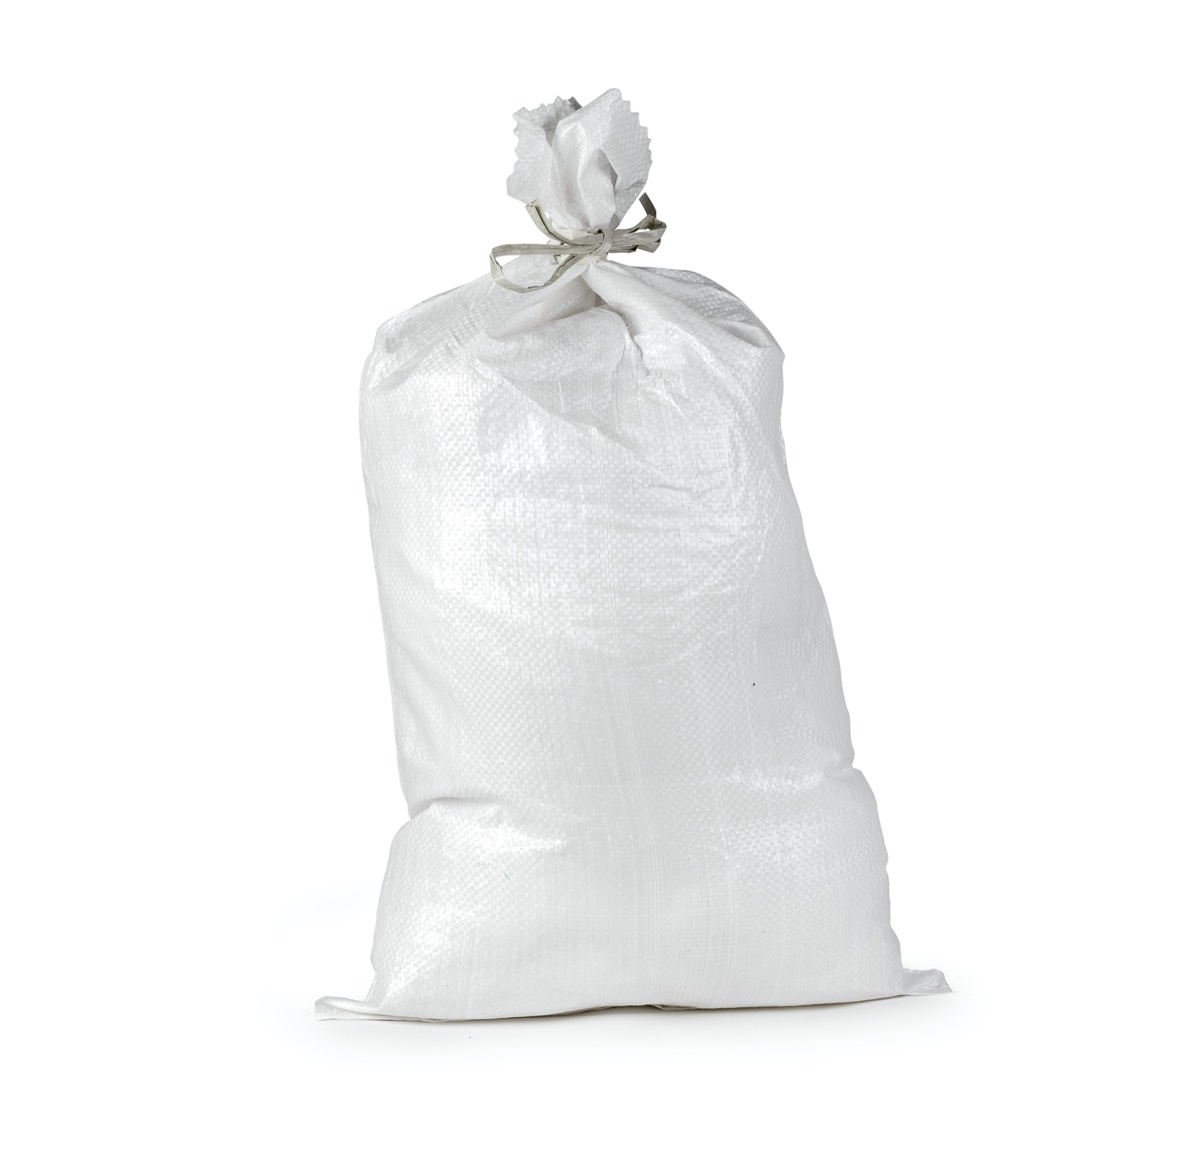 Empty First Aid Bag | First Response Bag | EMS Bags • First Aid Supplies  Online